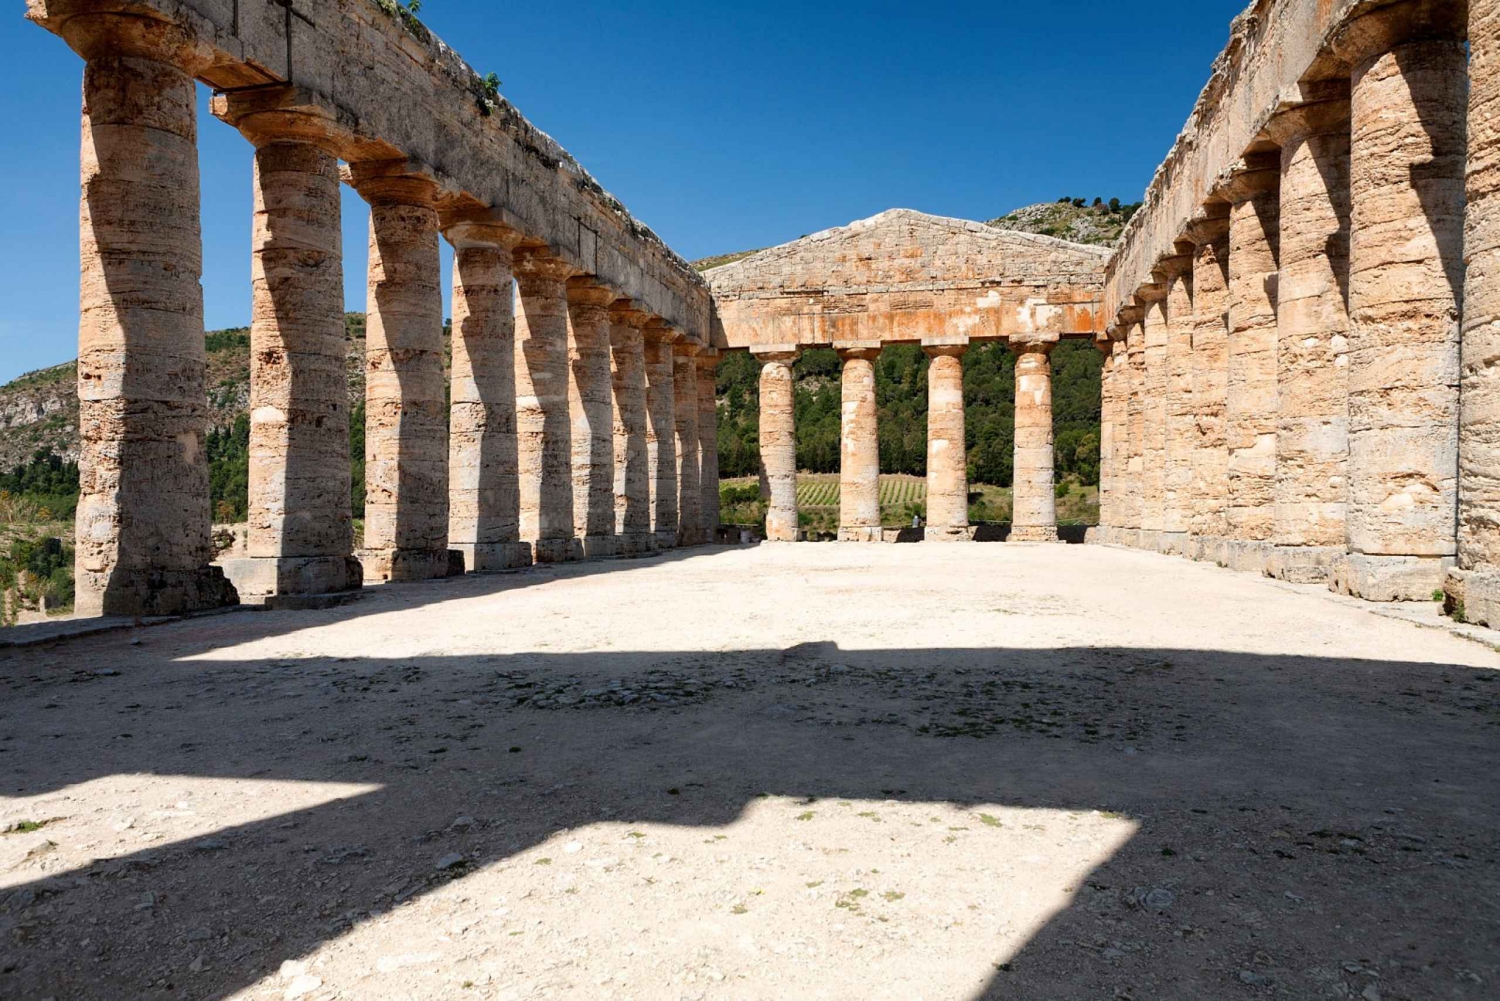 Segesta: Archeological Park Entry Ticket and Pemcards